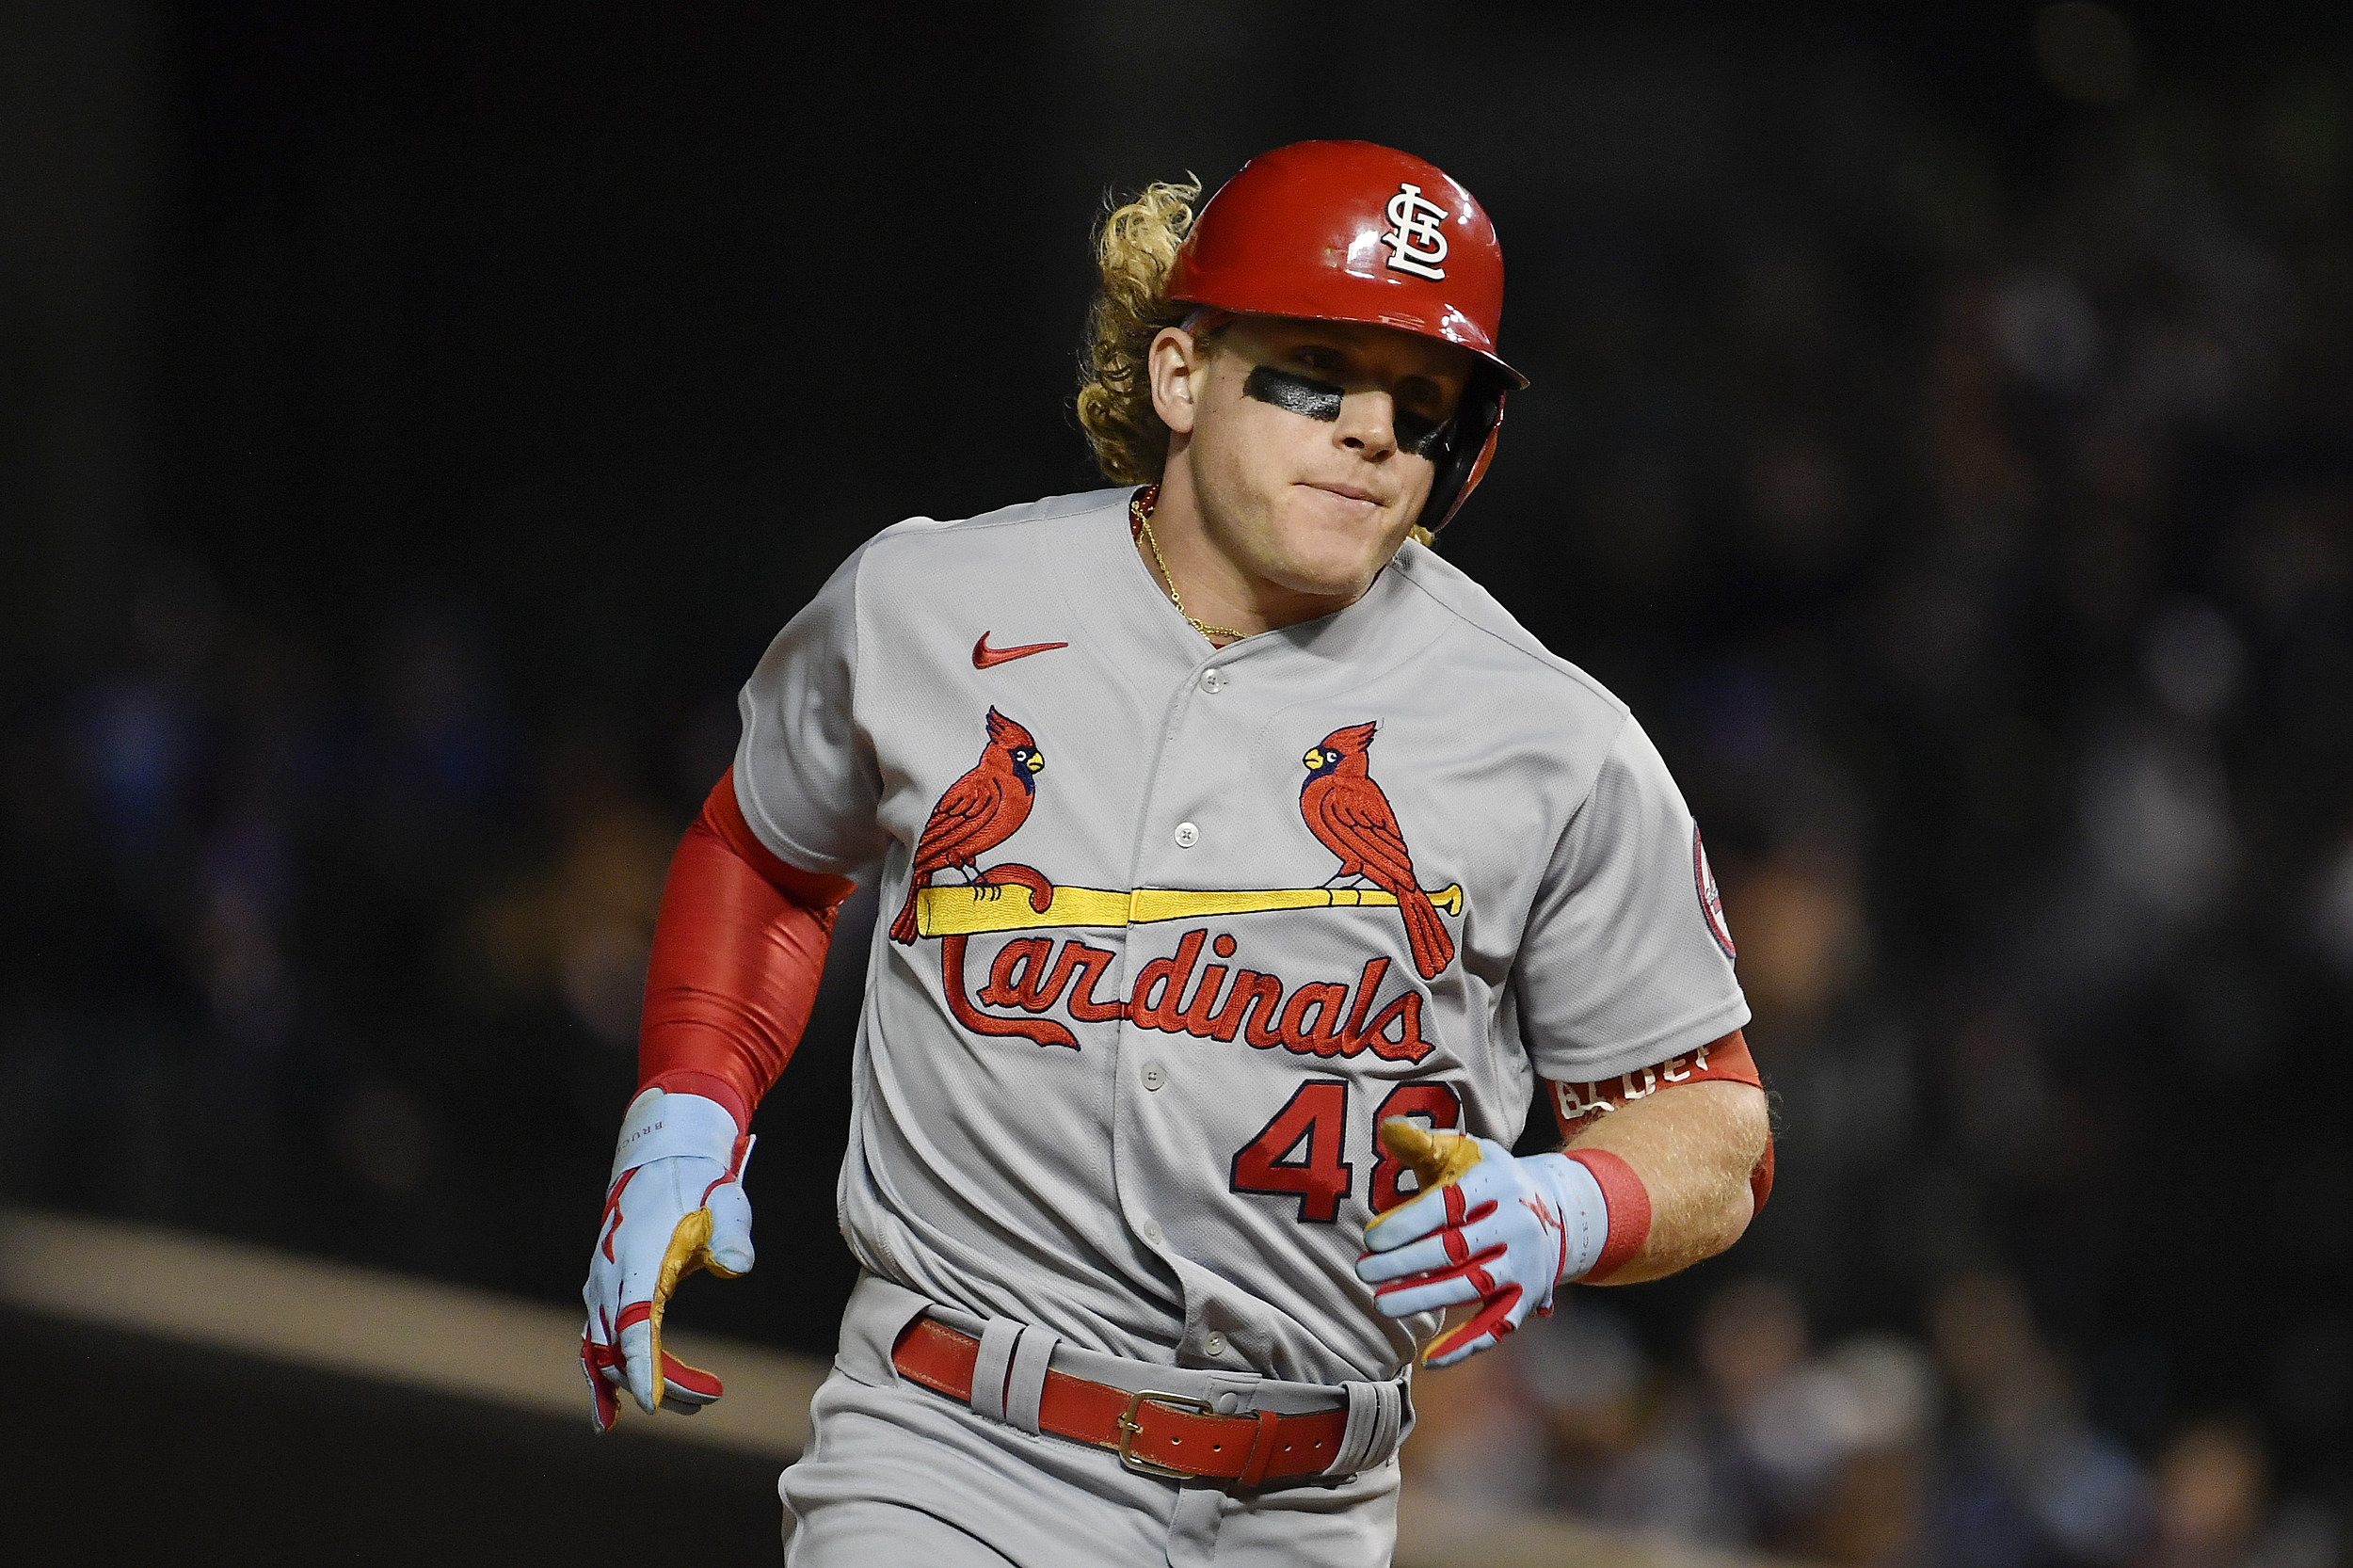 To no one's surprise, Harrison Bader - St. Louis Cardinals